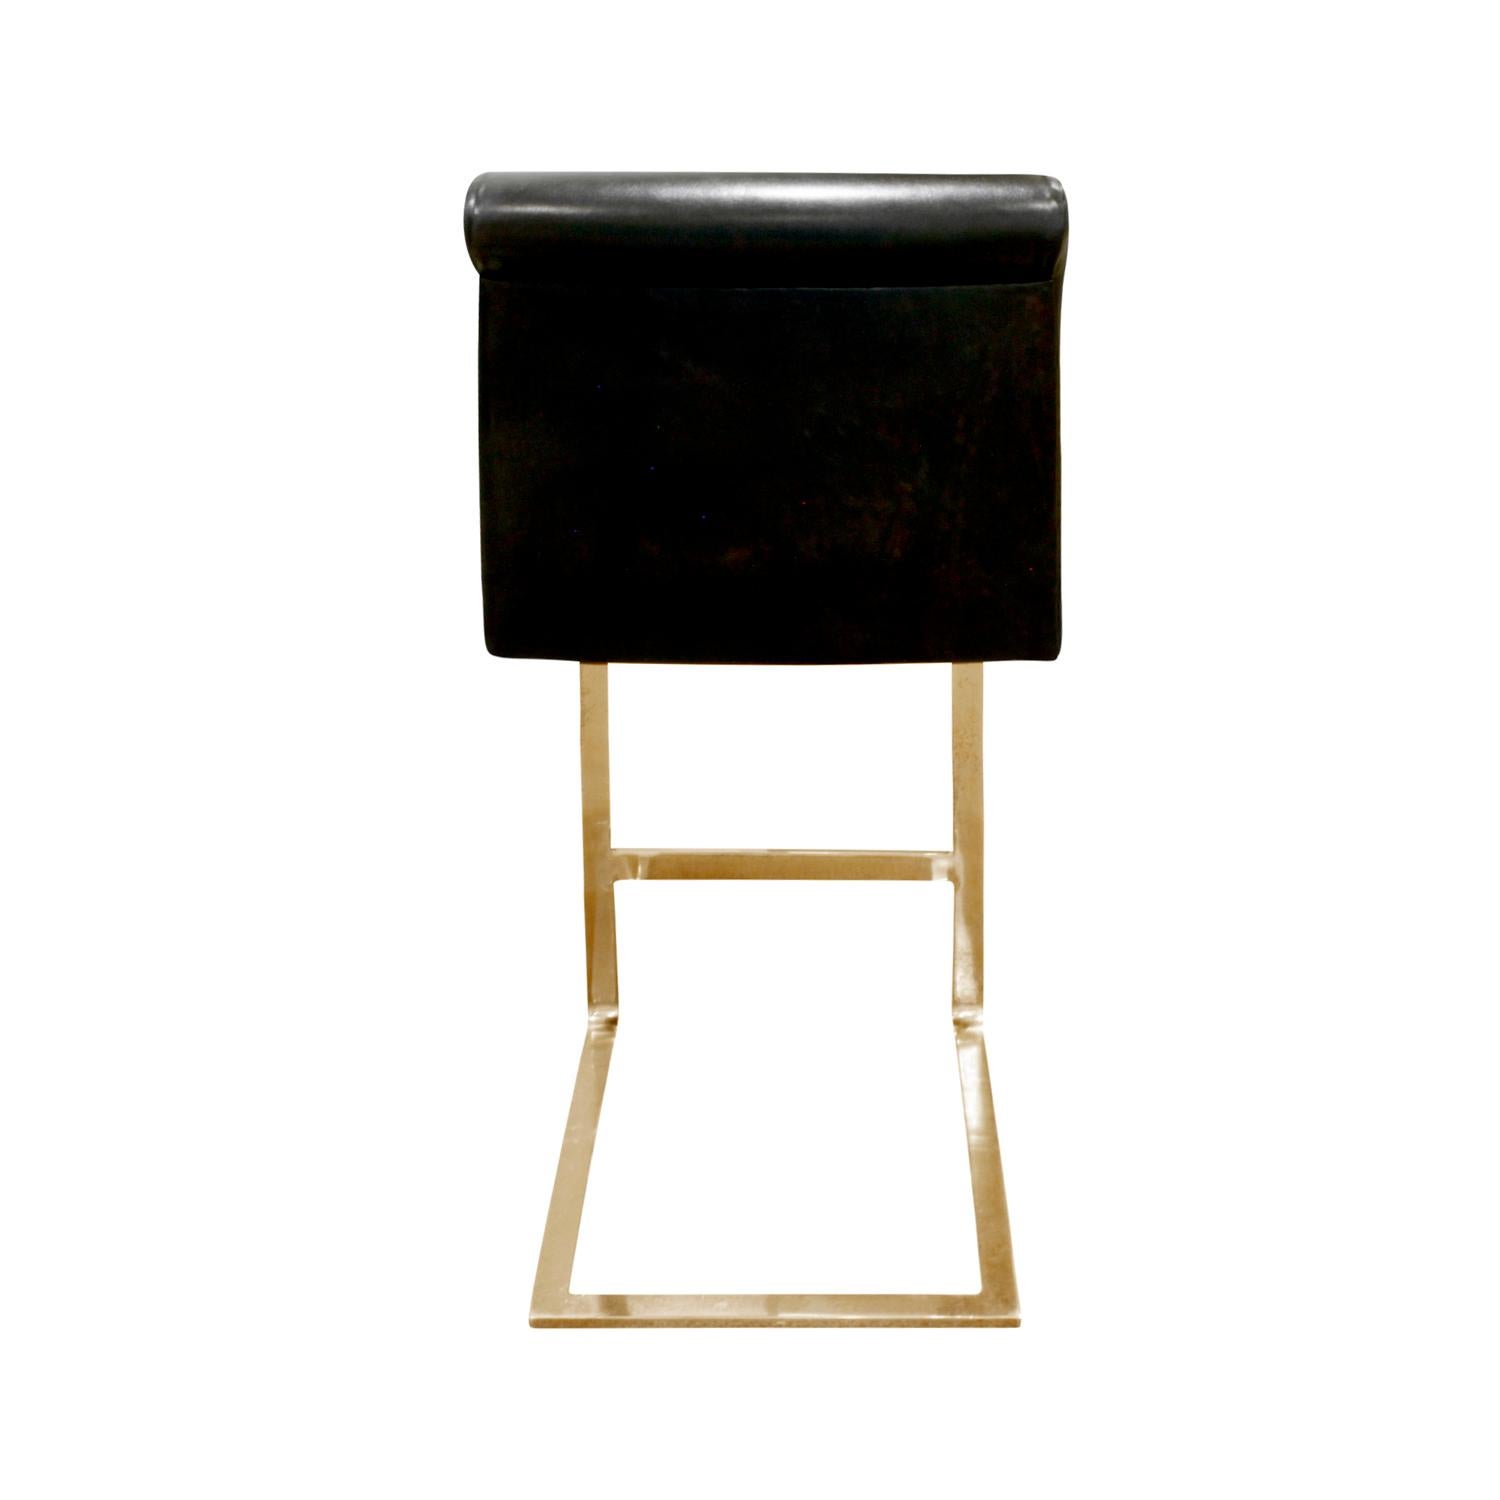 Hand-Crafted Pace Collection Set of Three Brass Bar Stools with Calf Skin Seats, 1970s